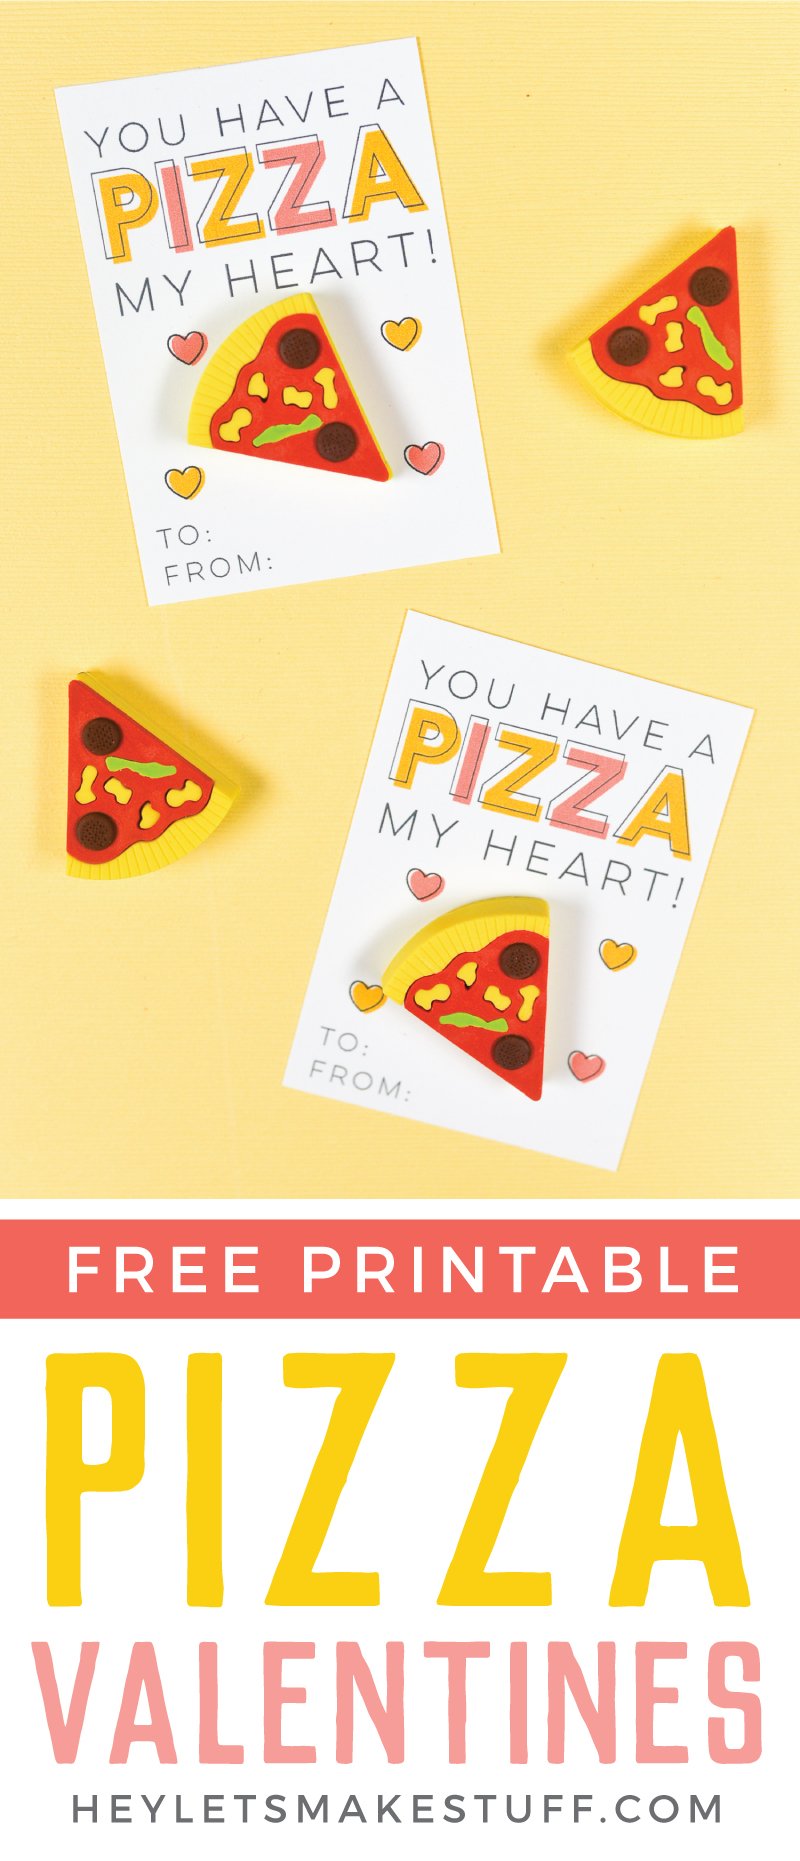 Two Valentine\'s Day cards with a piece of fake pizza on them and the saying, \"You Have a Pizza My Heart\" with advertising for Free Printable Pizza Valentines from HEYLETSMAKESTUFF